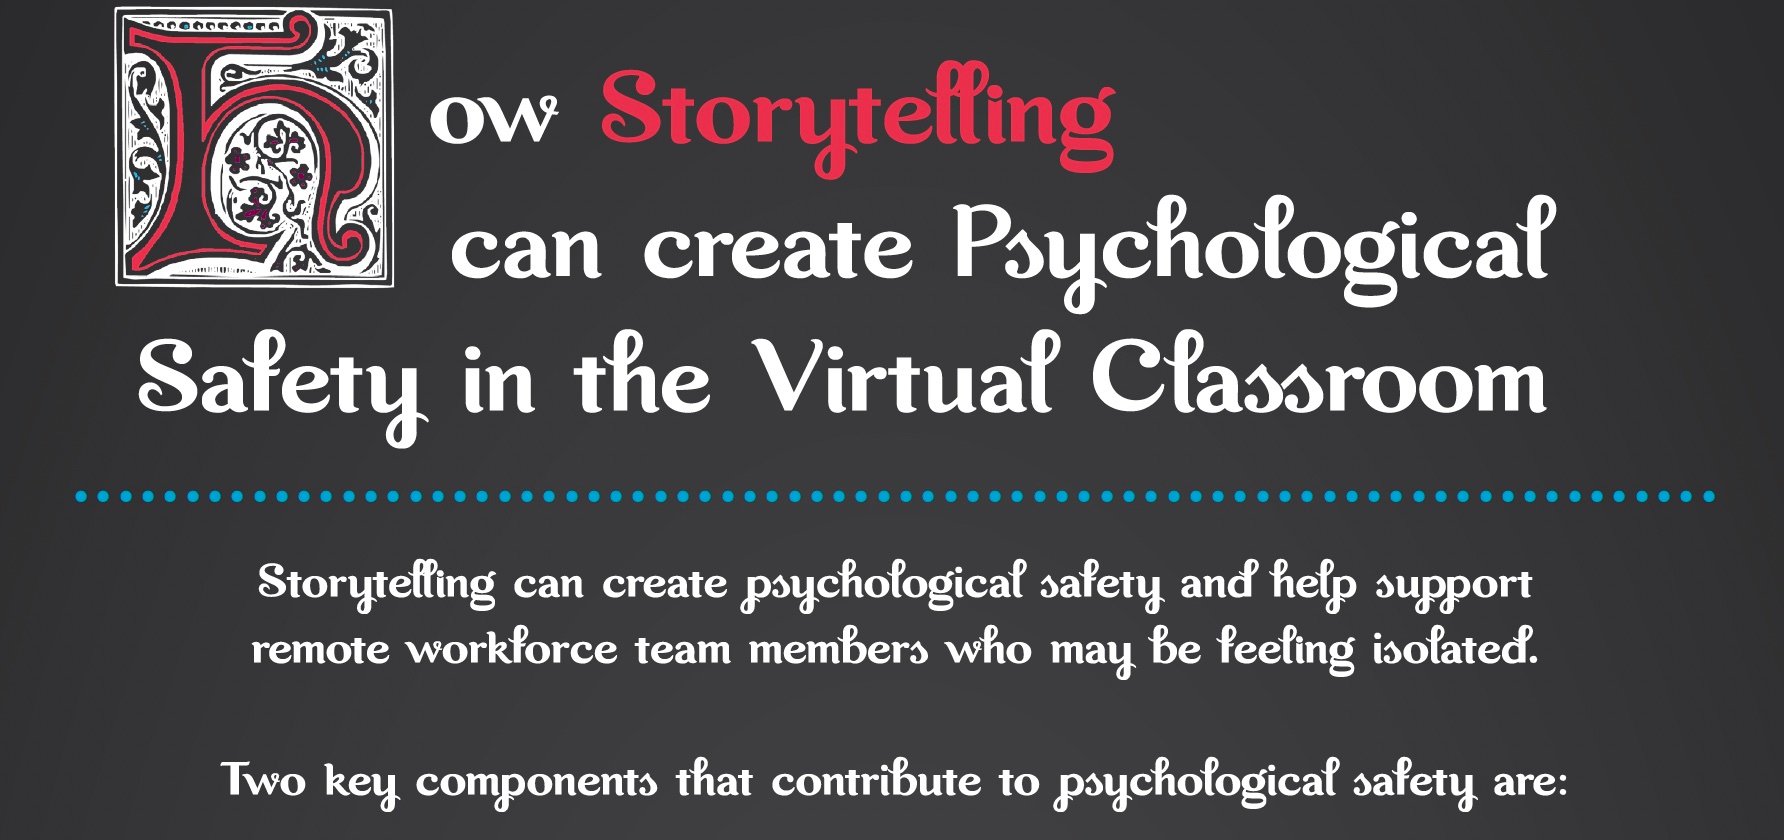 How Storytelling can Create Psychological Safety in the Virtual Classroom